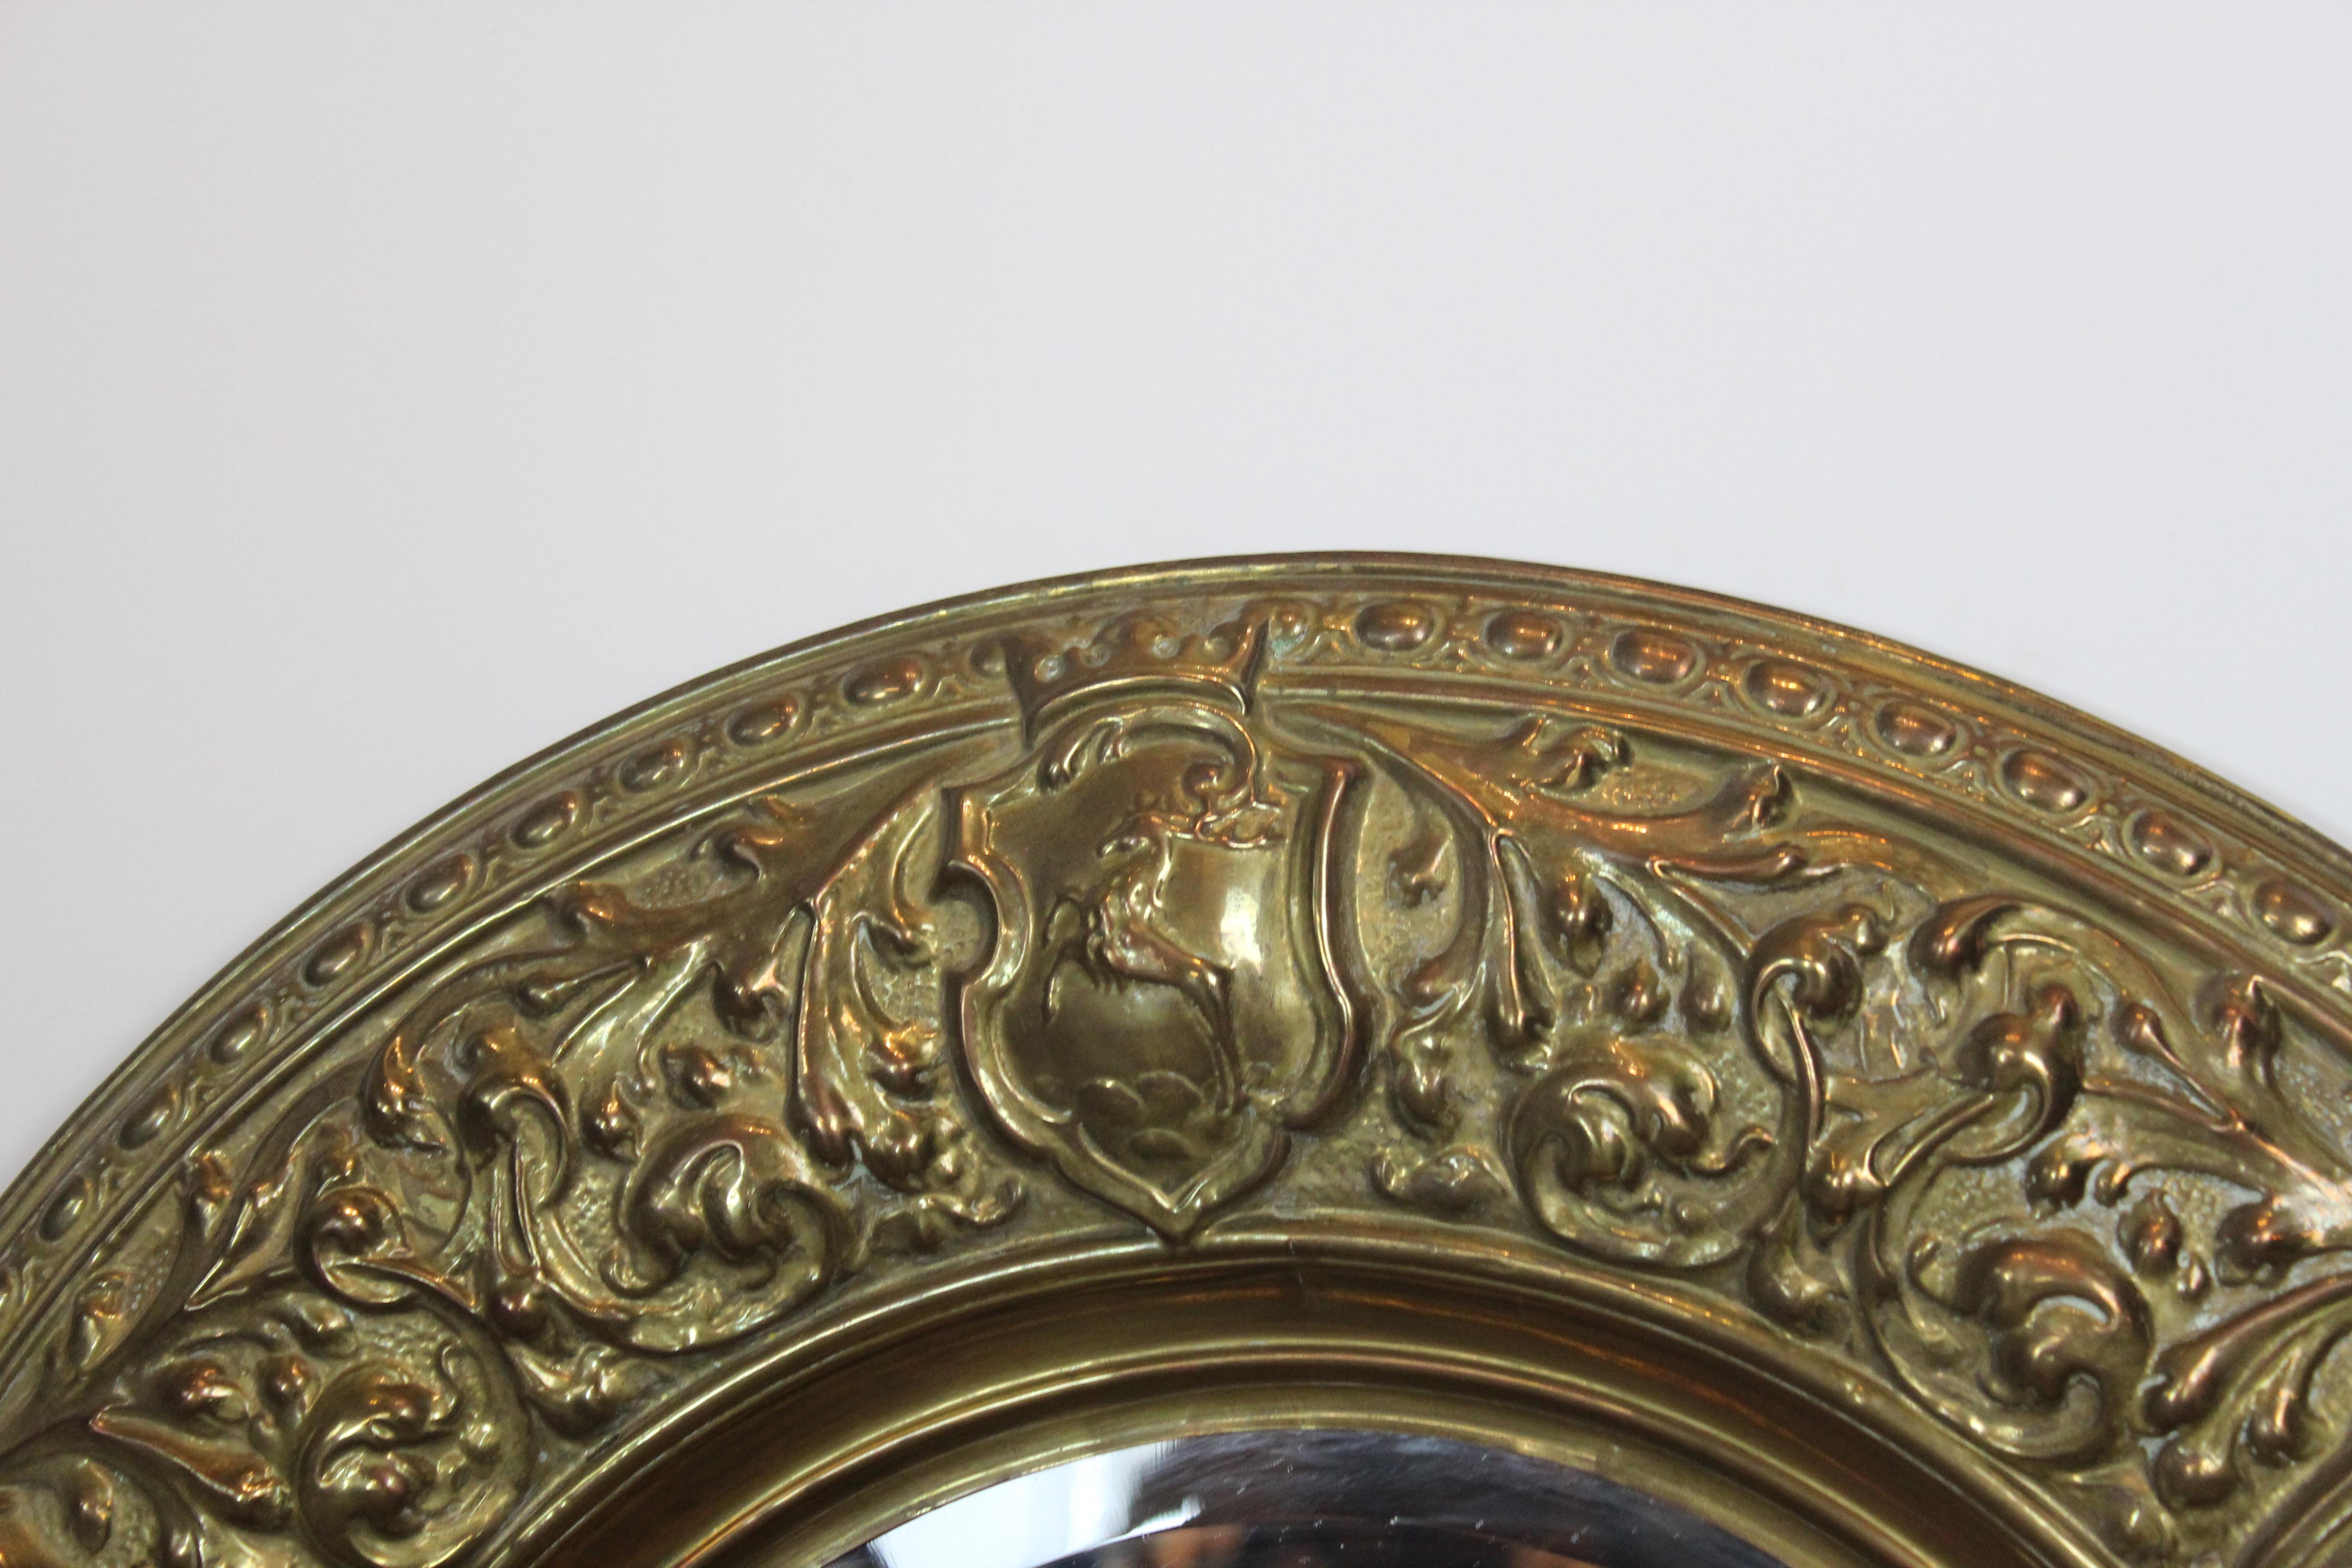 Pair of embossed brass round shape medieval theme mirror. The mirrors are beveled edge.